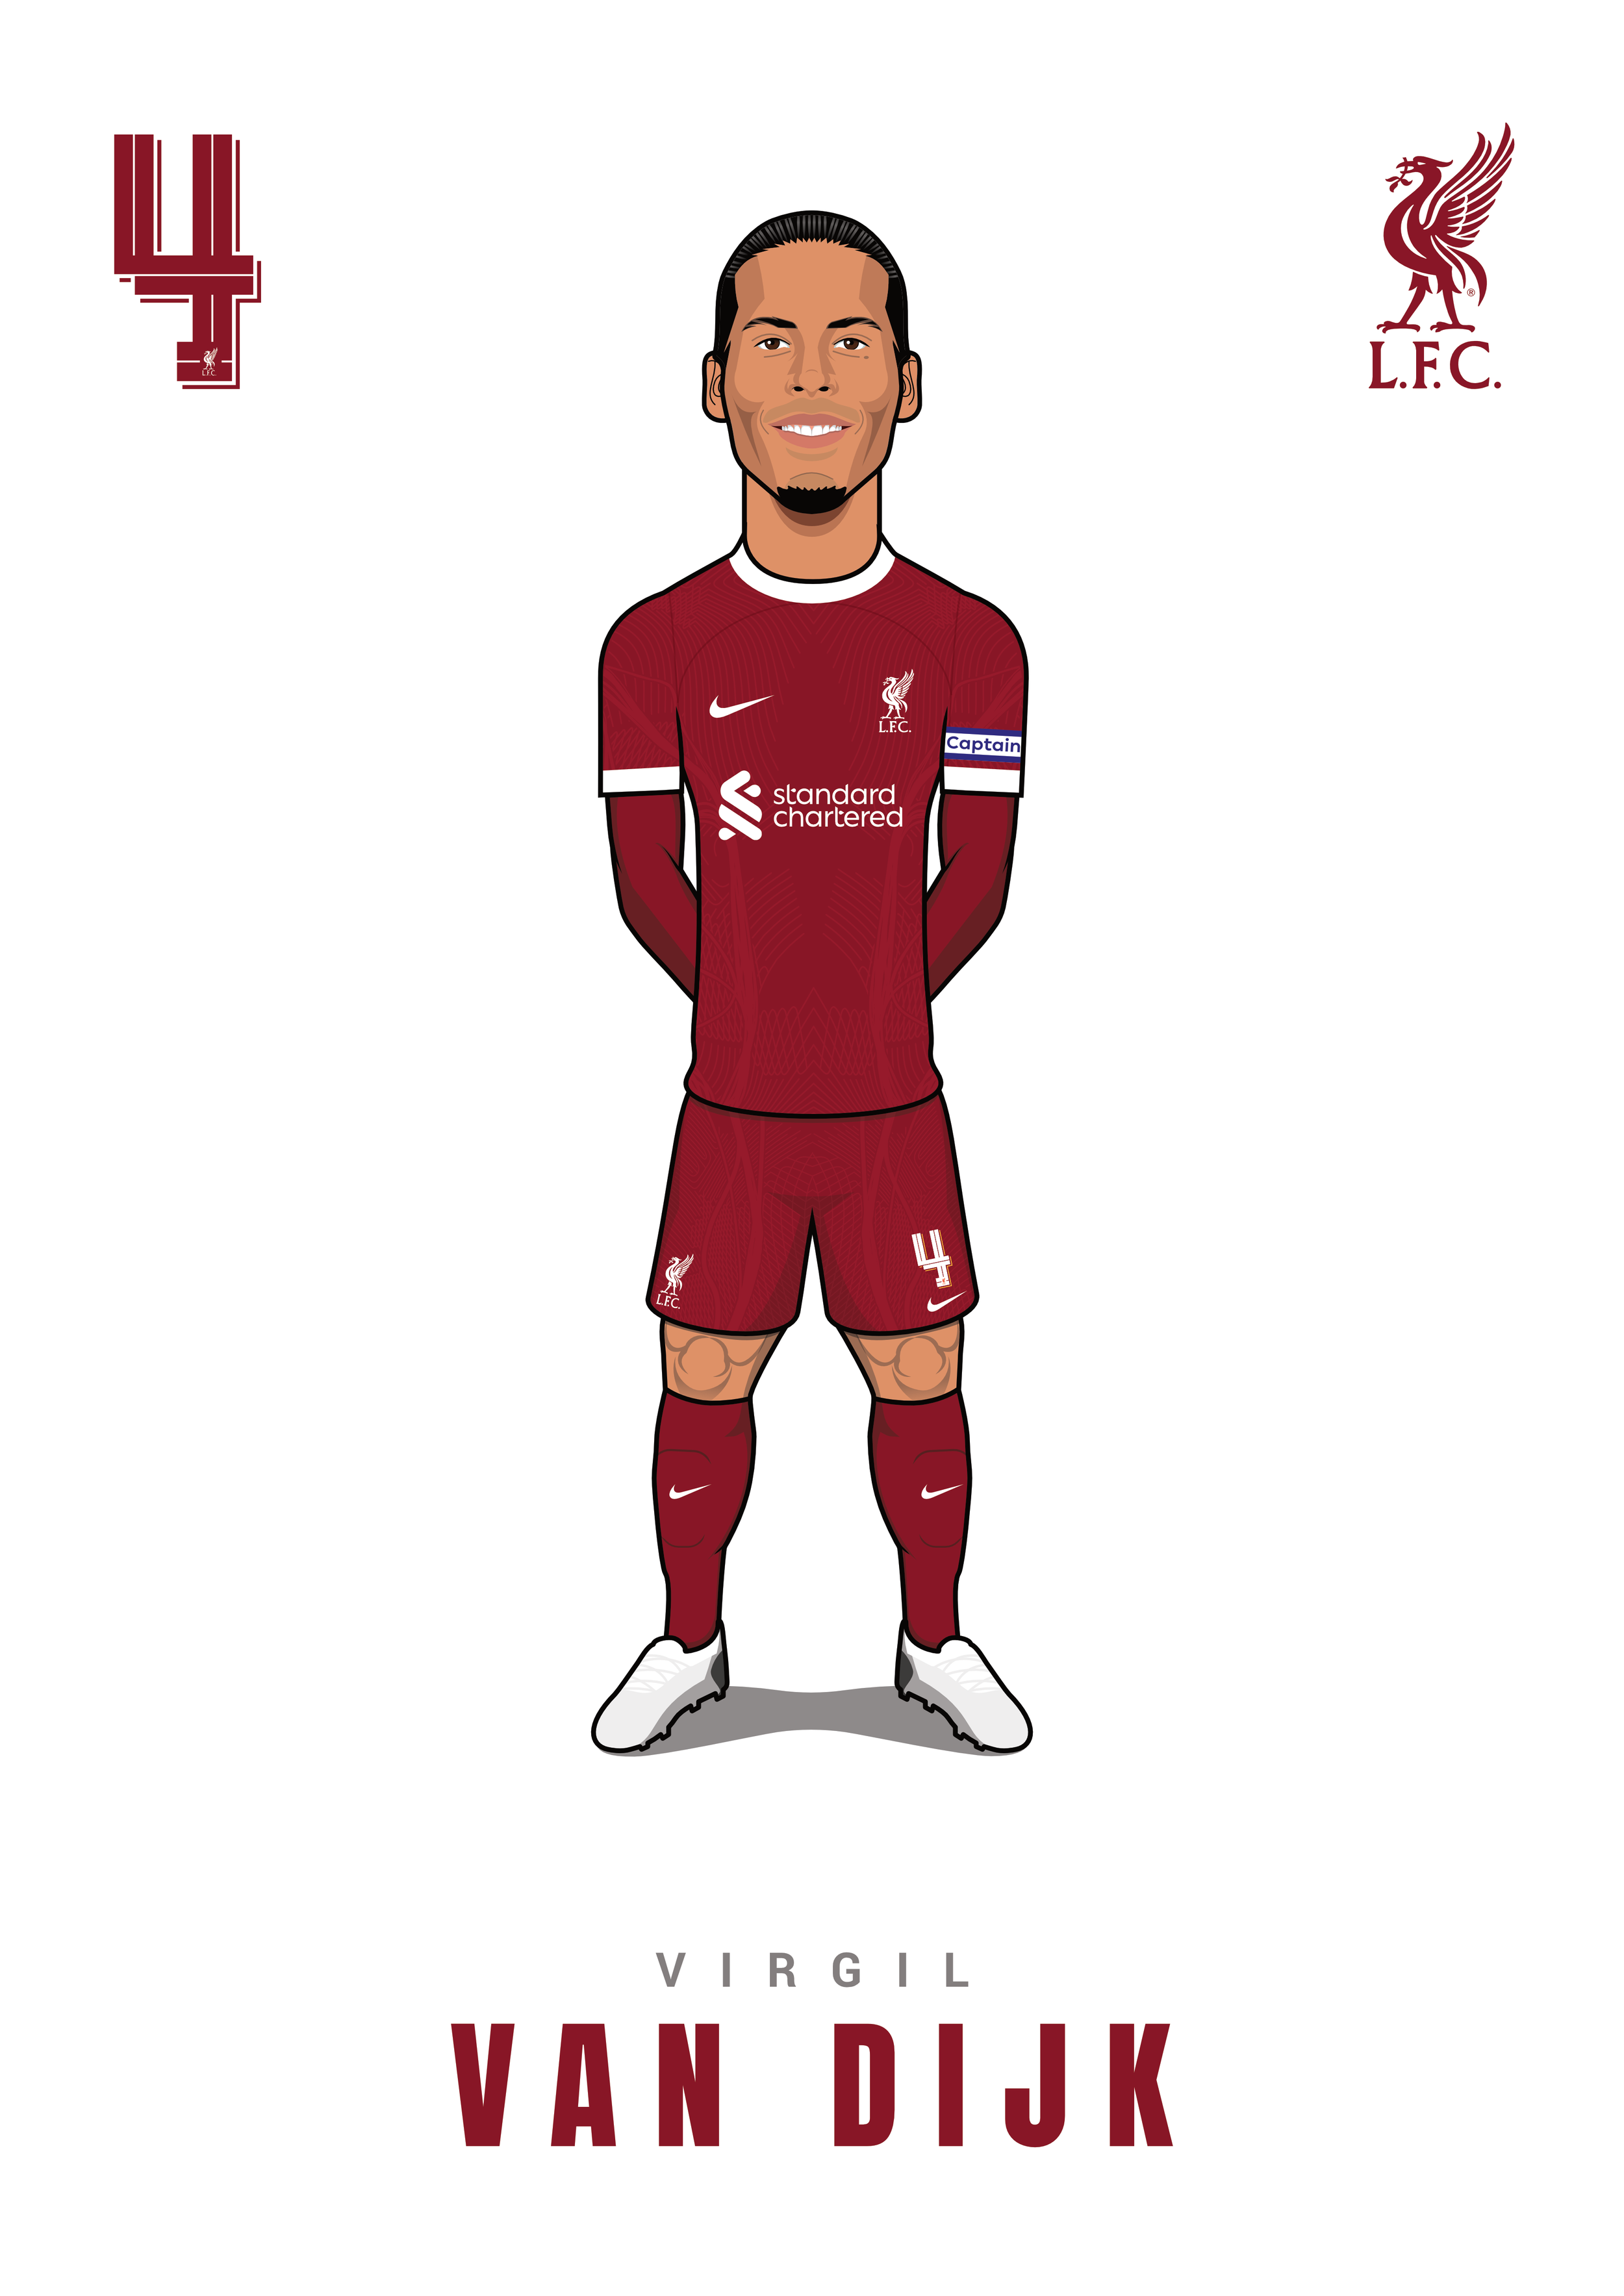 LFC Signed Players Virgil.png